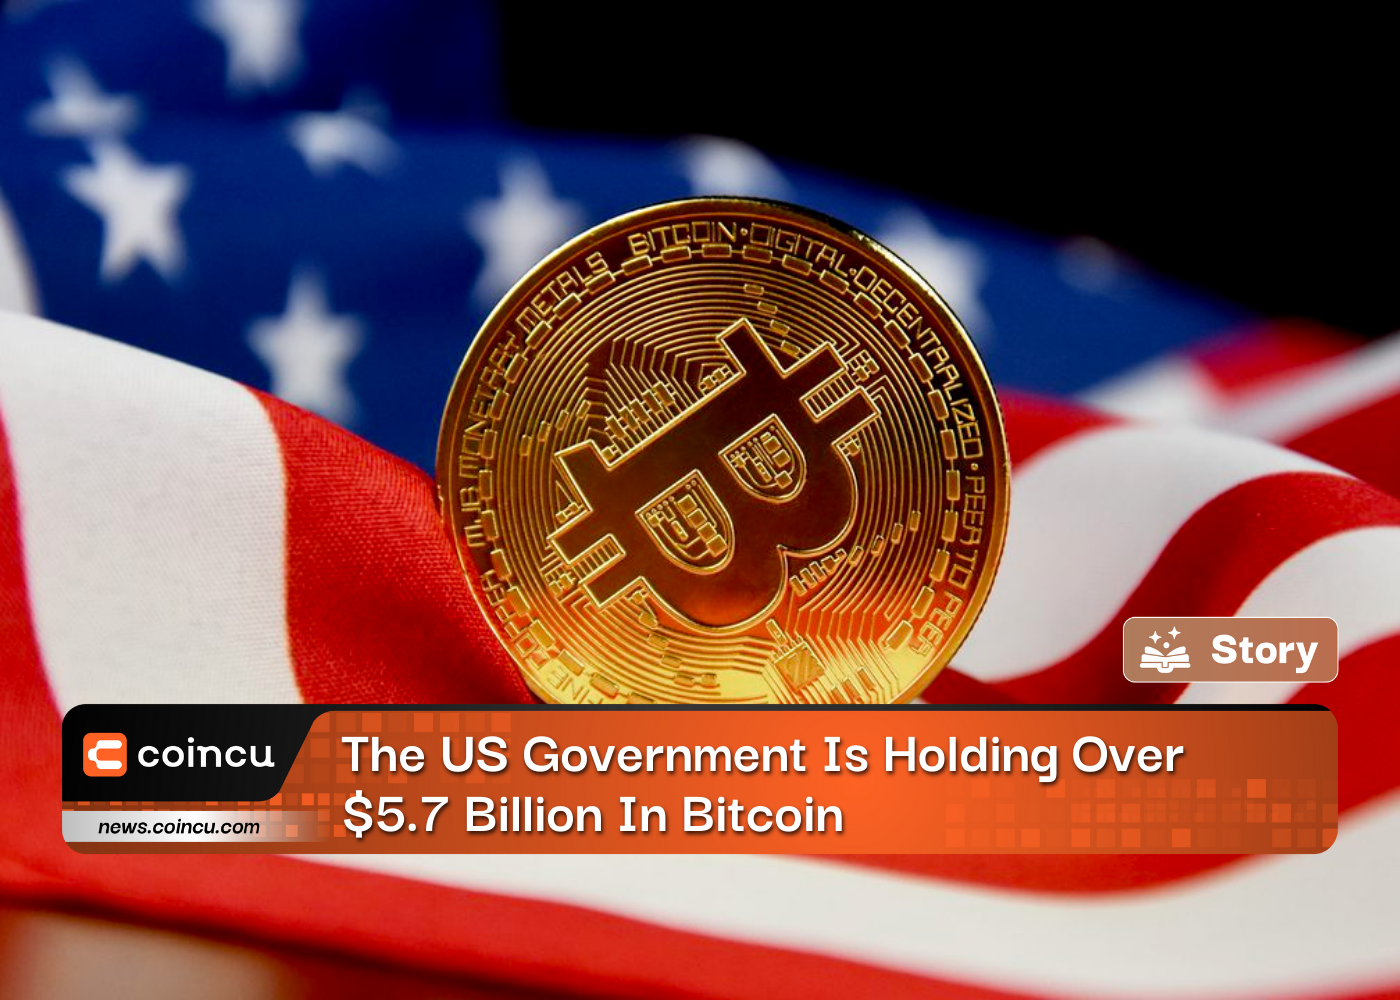 Interesting Information: The US Government Is Holding Over $5.7 Billion In Bitcoin